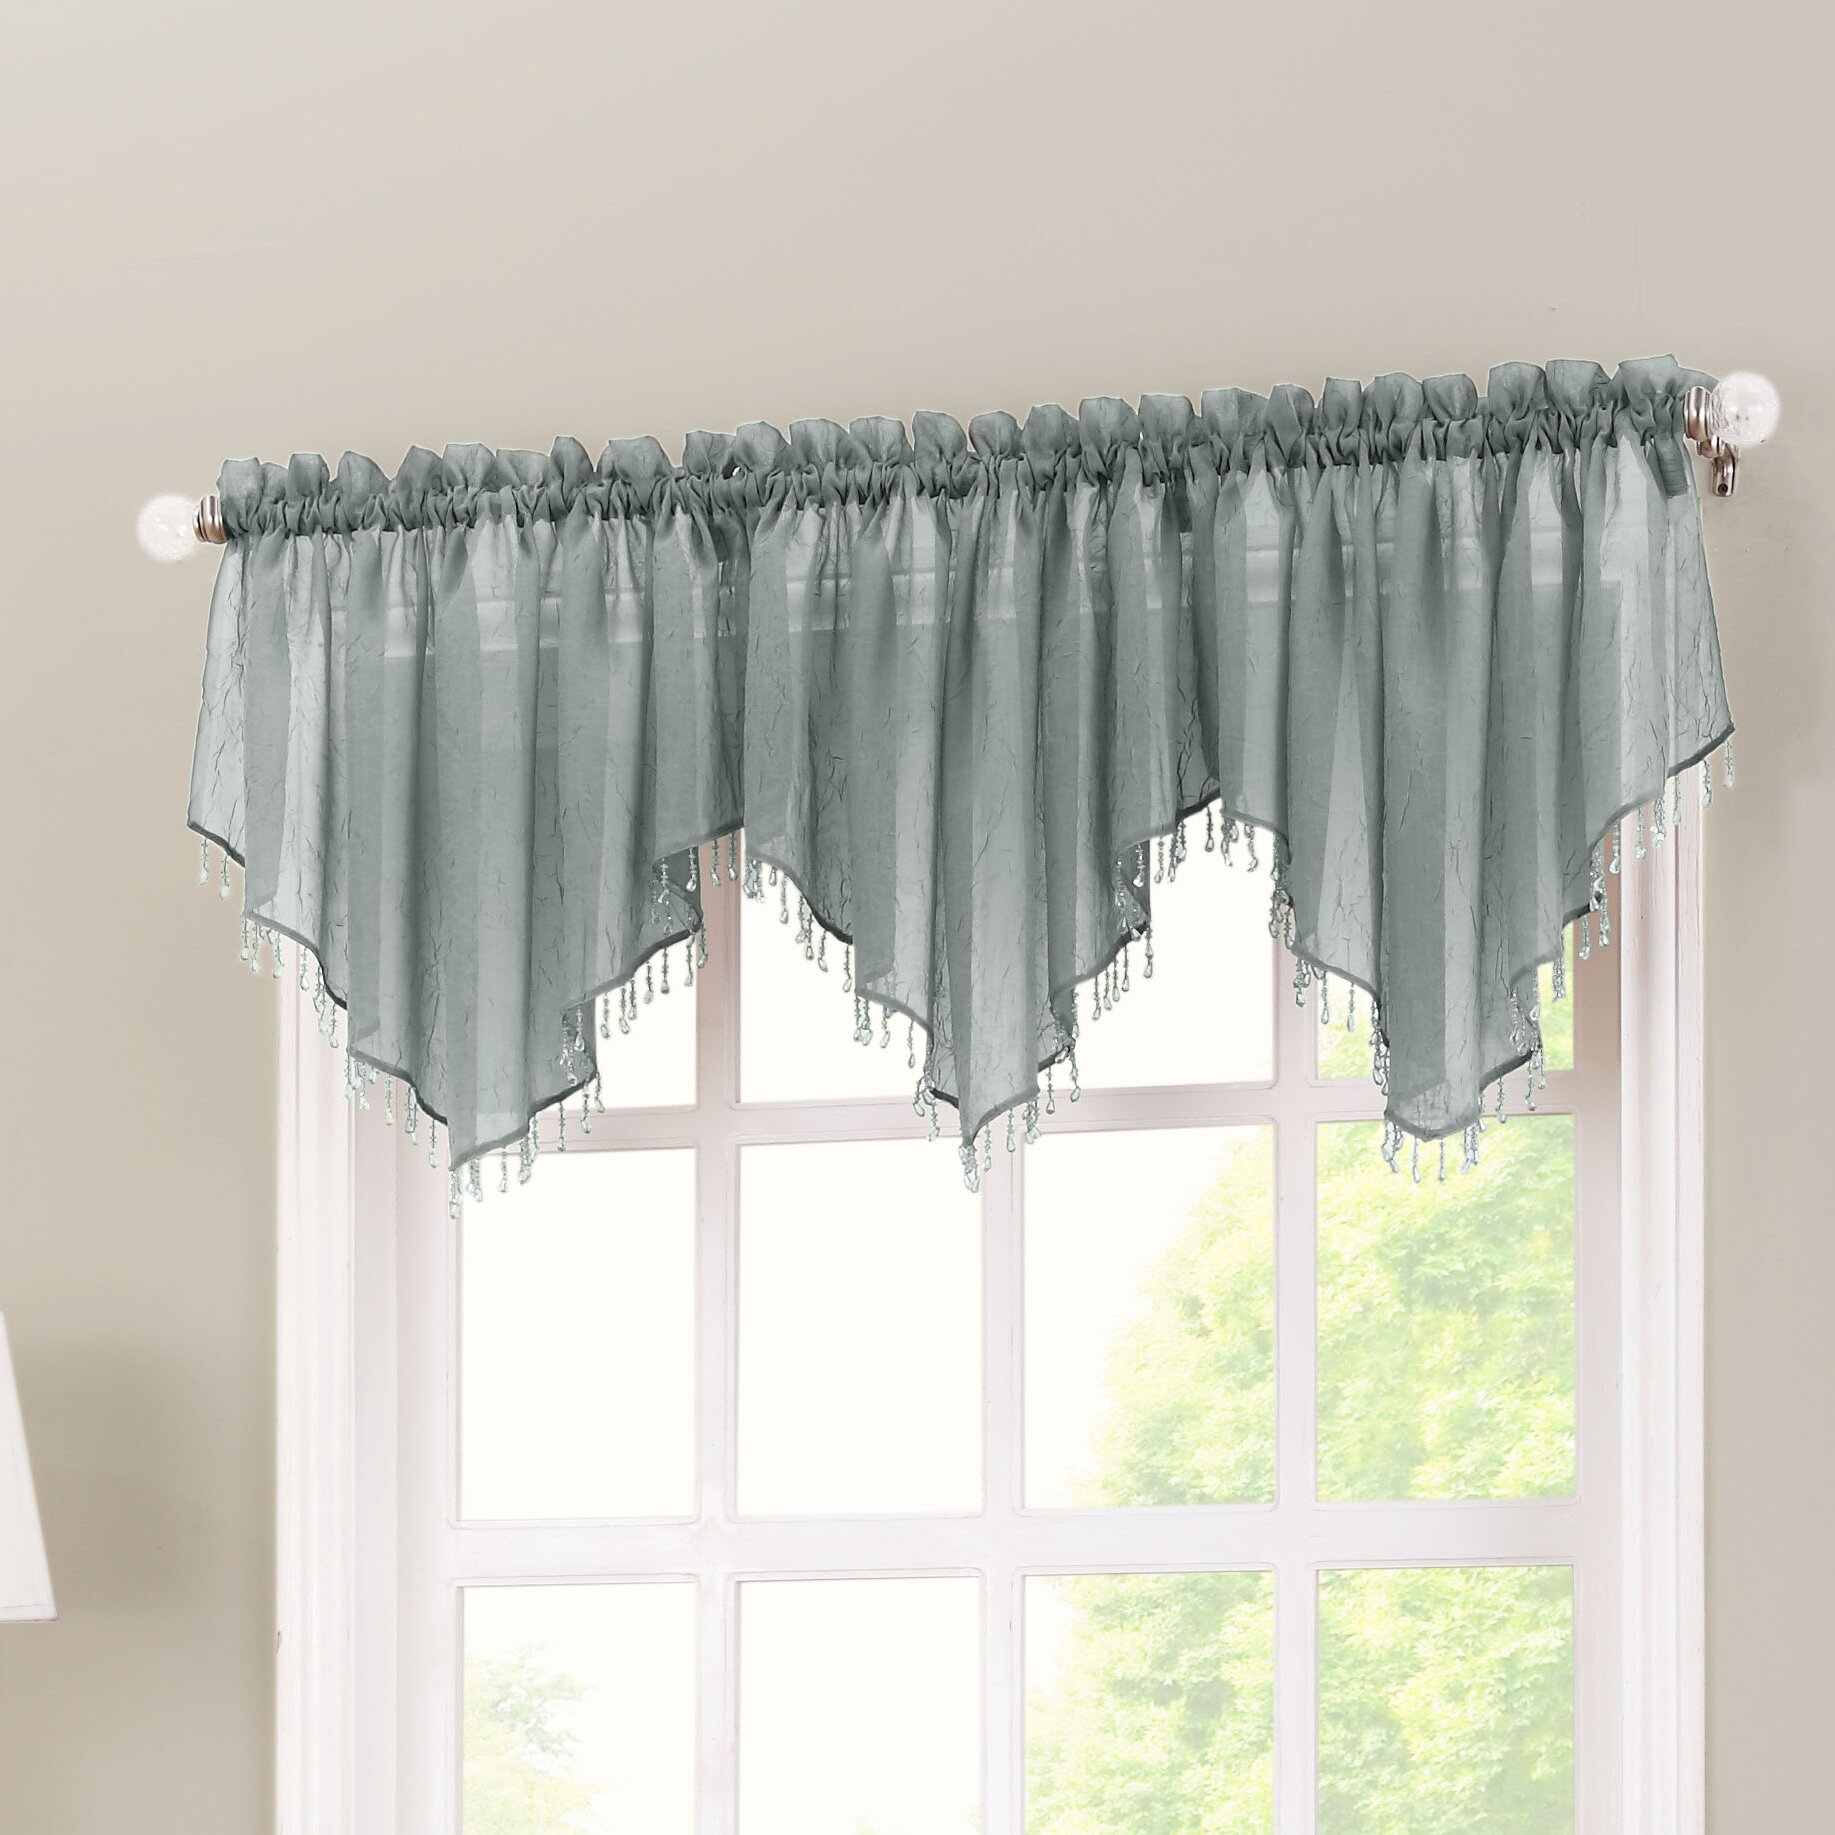 Crushed Sheer Voile 51 Curtain Valance LCTN1054 